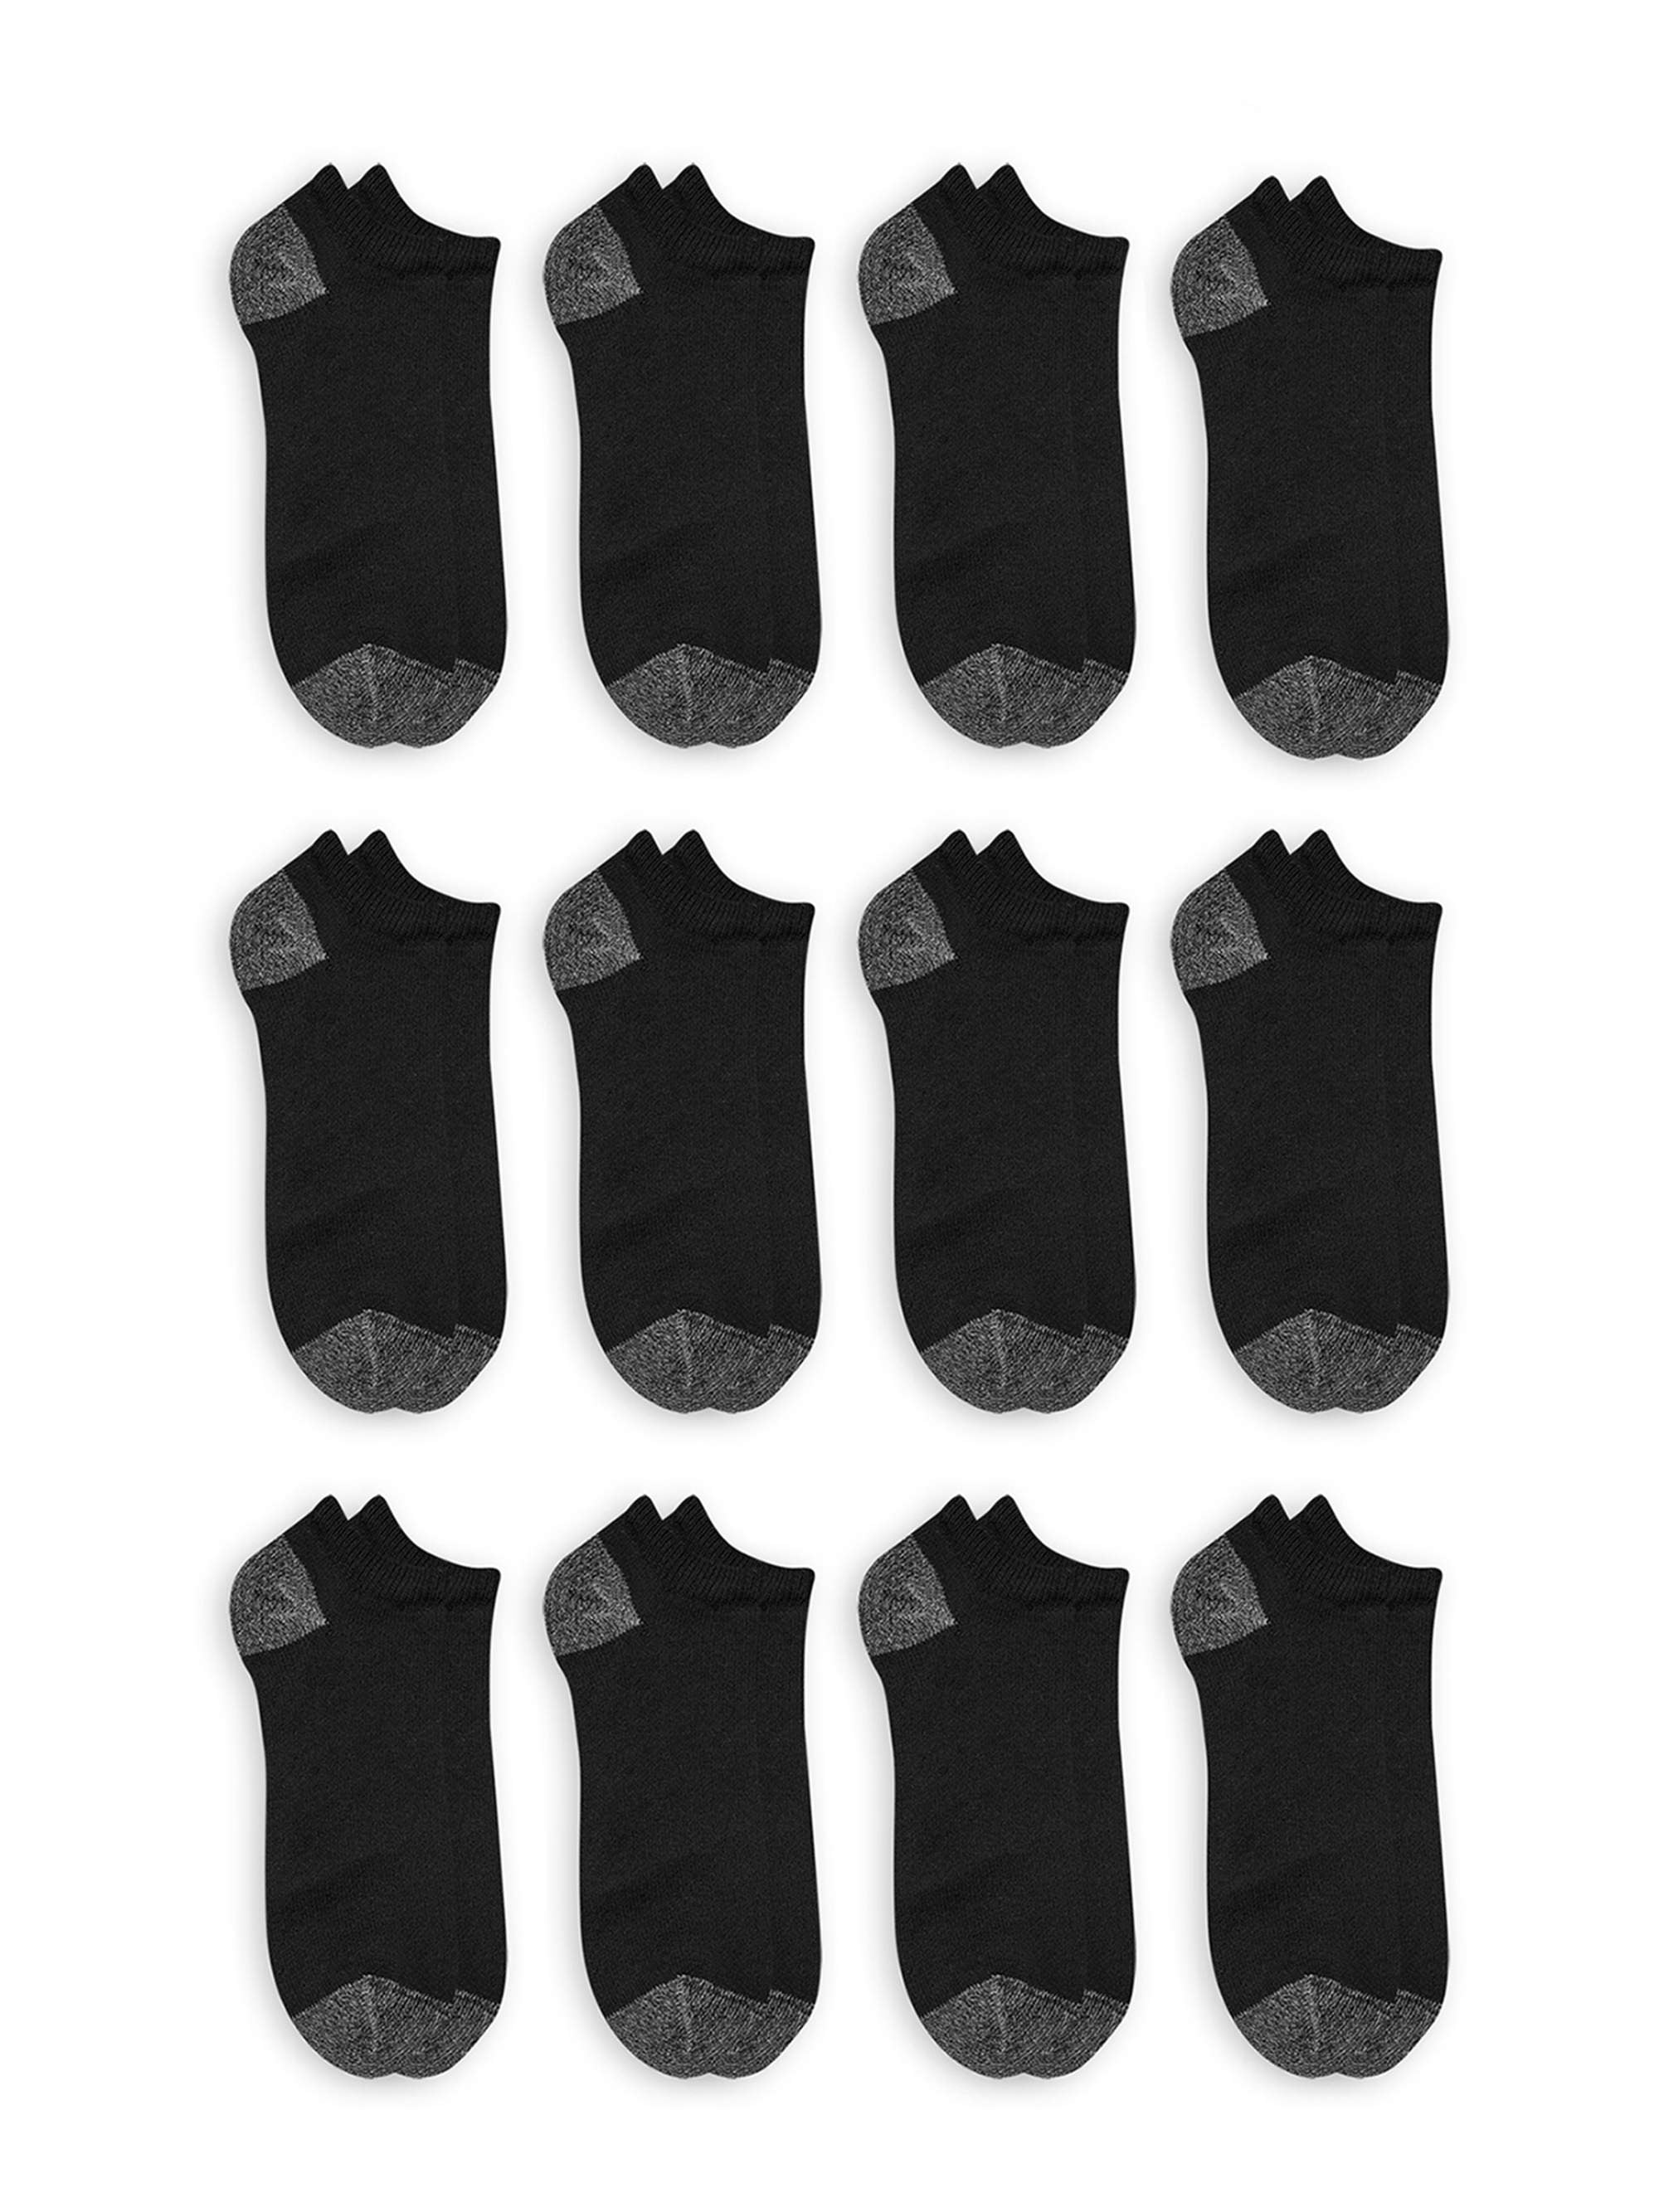 Athletic Works Men's Big and Tall Low Cut Socks 12 Pack